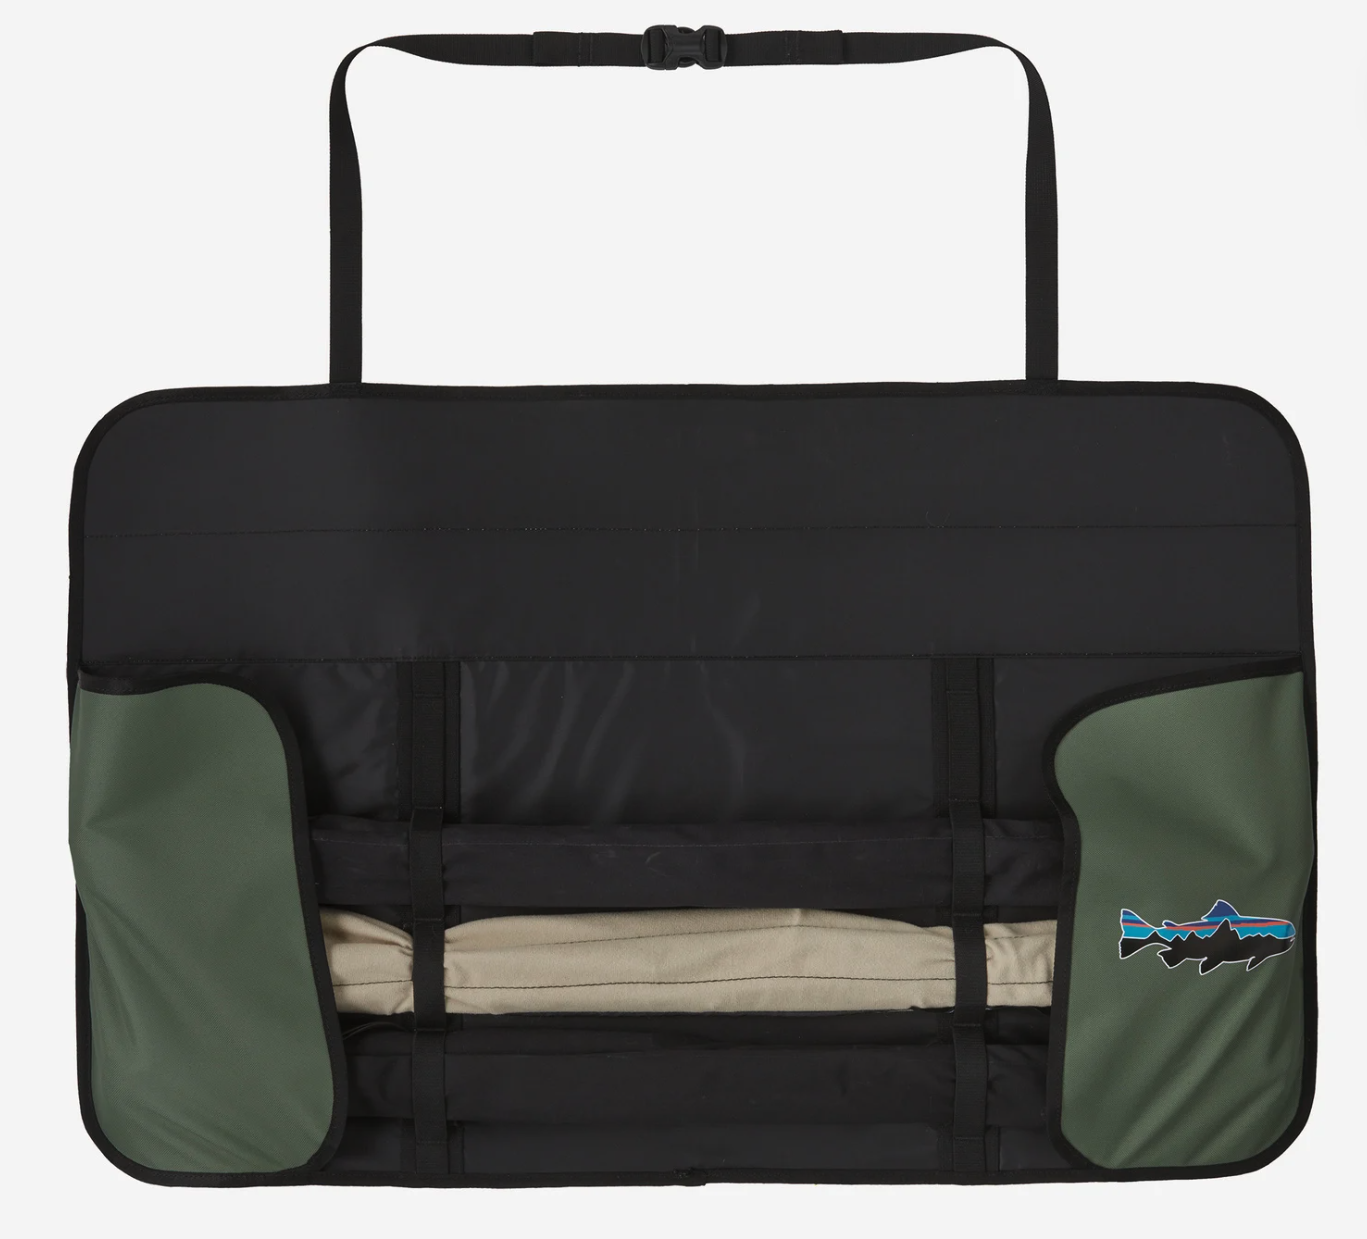 patagonia travel rod roll fly rod bag